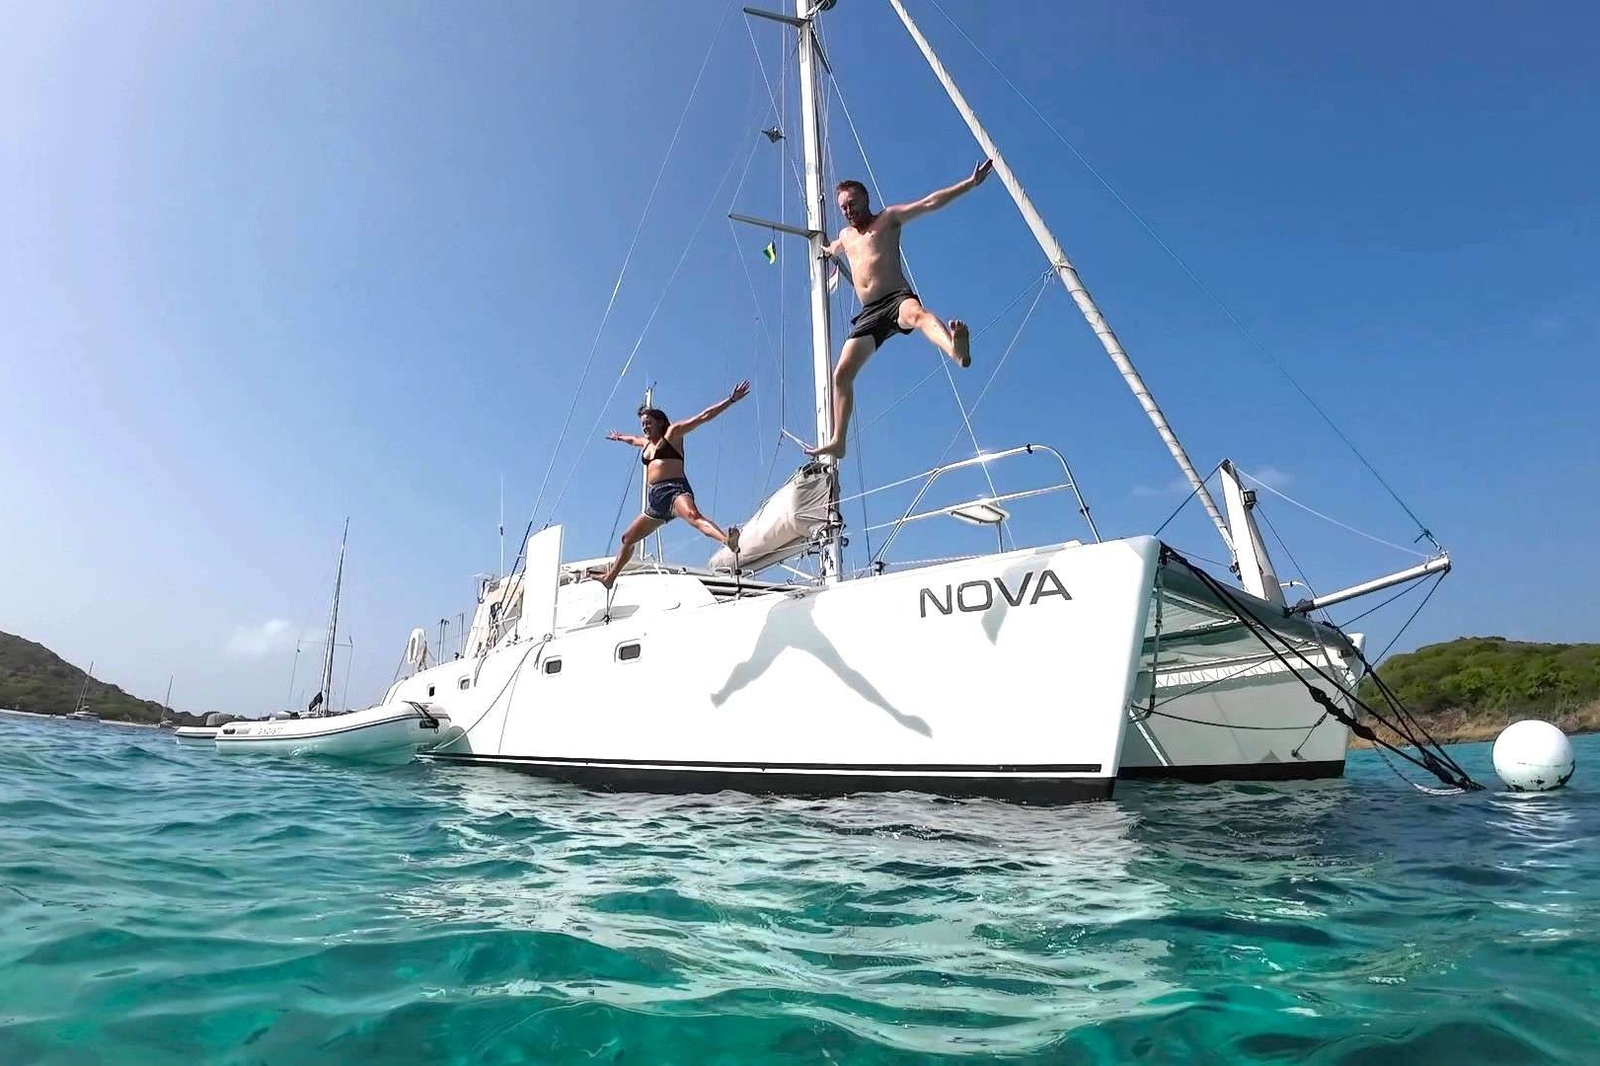 Welcome aboard catamaran Nova. 

Nova has been recently beautifully upgraded and totally refitted in 2022-2023 with brand new Dynema sails, rigging, engines, electronics, dinghy, interior and exterior fittings and new air conditioning, ice maker and much more. 
Star link is available onboard for fast unlimited wifi.

This Roberson and Cane -”Custom Projects Build “and the model Leopard 47 has a superb track record and is a proven seaworthy vessel sailing from Cape Town, South Africa to the Caribbean, and crossing the Atlantic from Europe to the Caribbean. After 7 seasons in the Mediterranean, Nova is now located in the Grenadines and ready for new Caribbean sailing adventures. 

Nova crew know the area well, having operated charter catamarans around the Grenadines in 2021-2022. They look forward to welcoming you onboard. 

